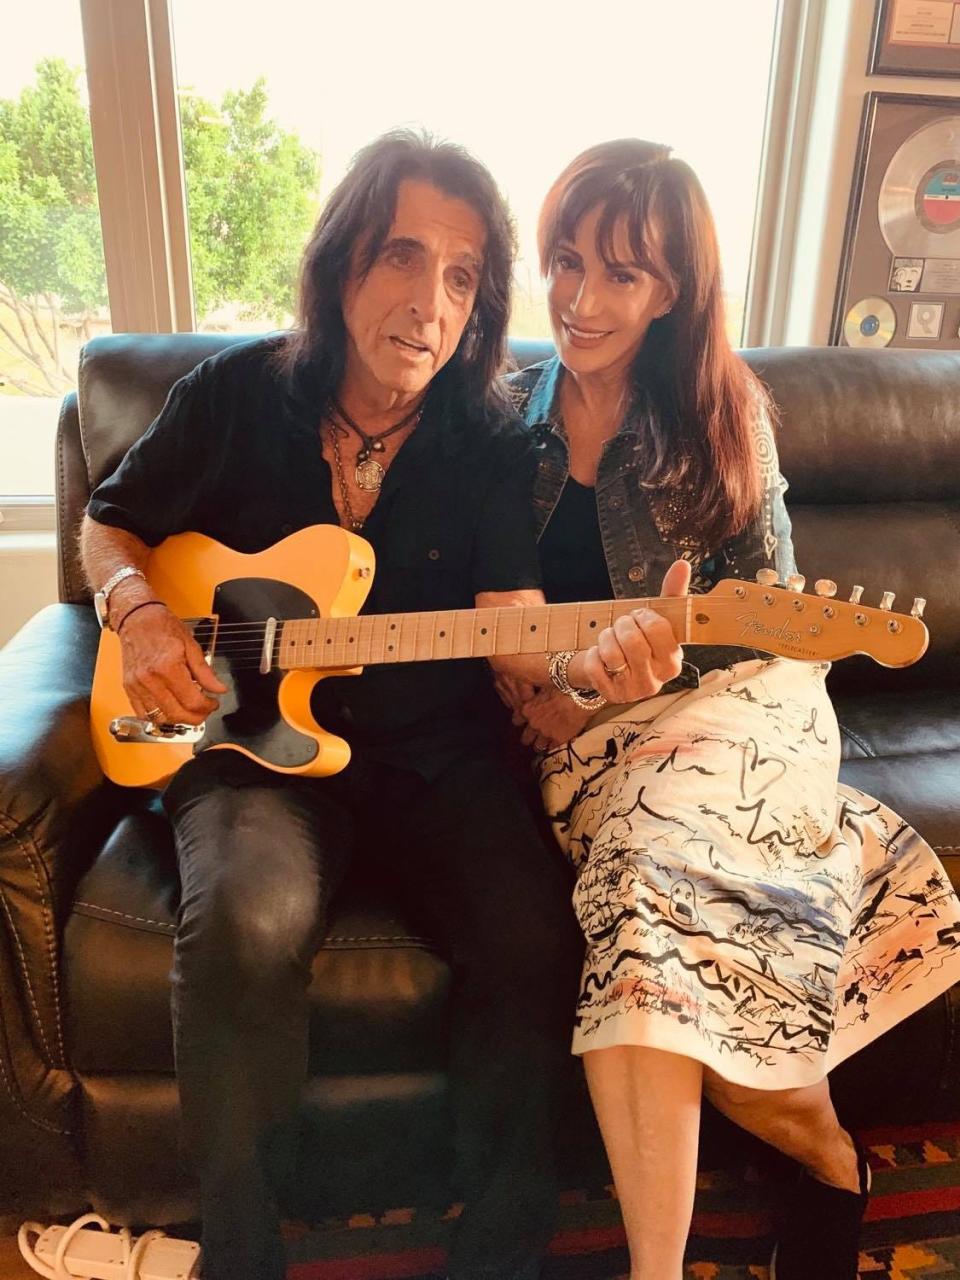 Alice and Sheryl Cooper at home in Paradise Valley, Arizona, after cutting short his European tour dates.